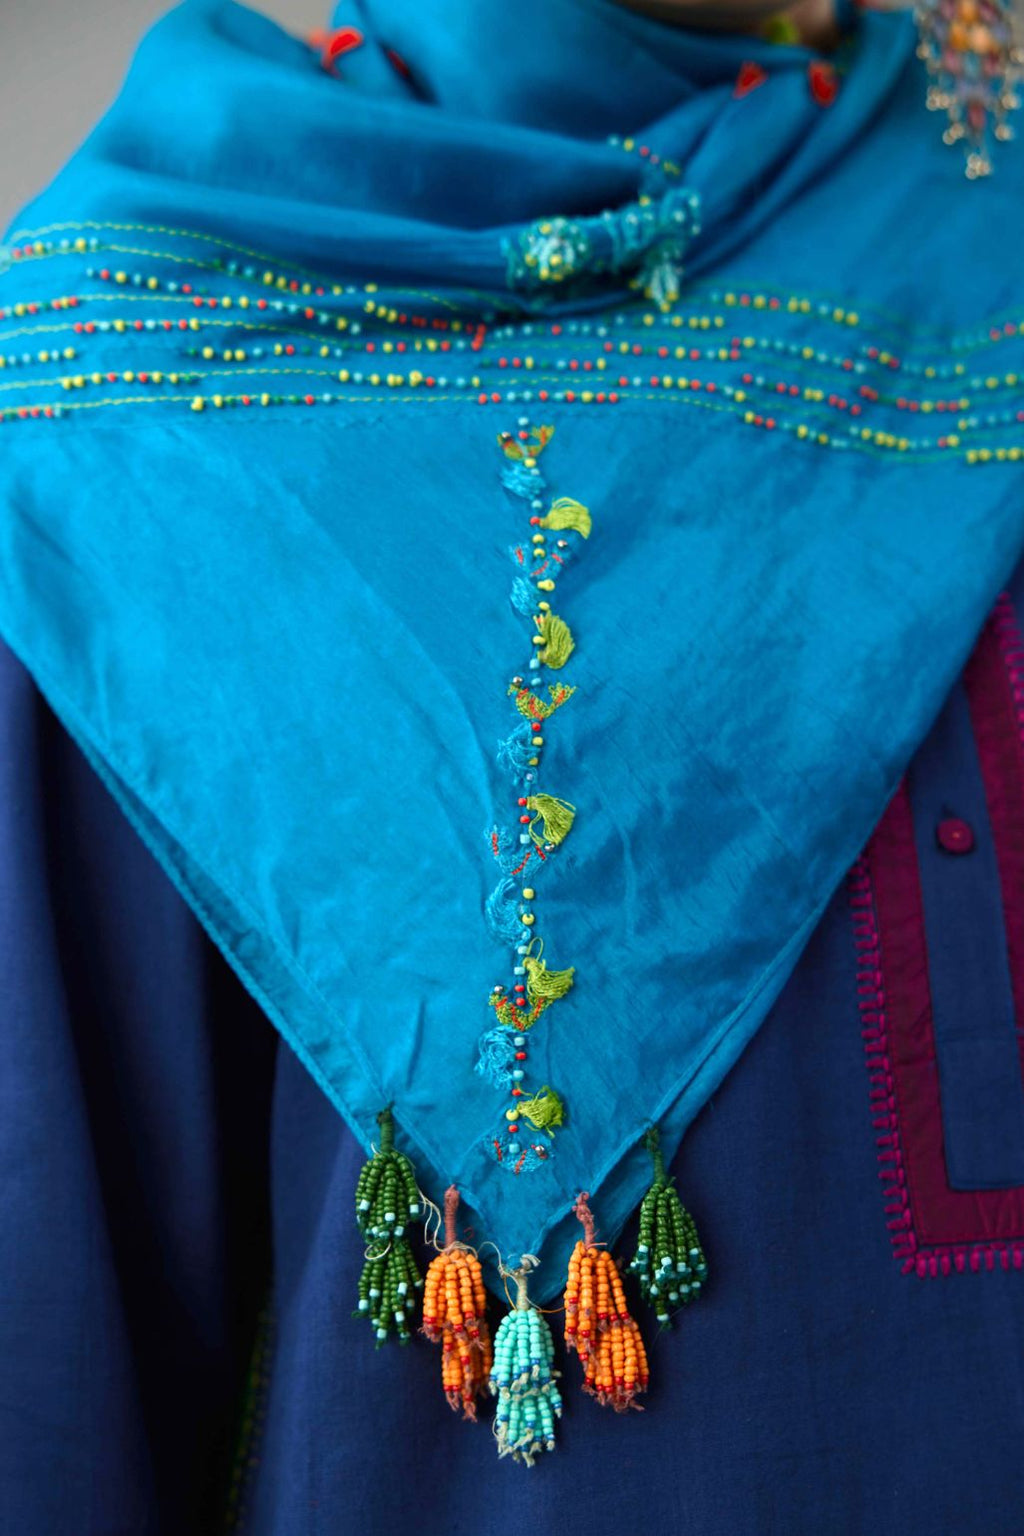 Turquoise blue square scarf with contrasting bird and tassel embroidery